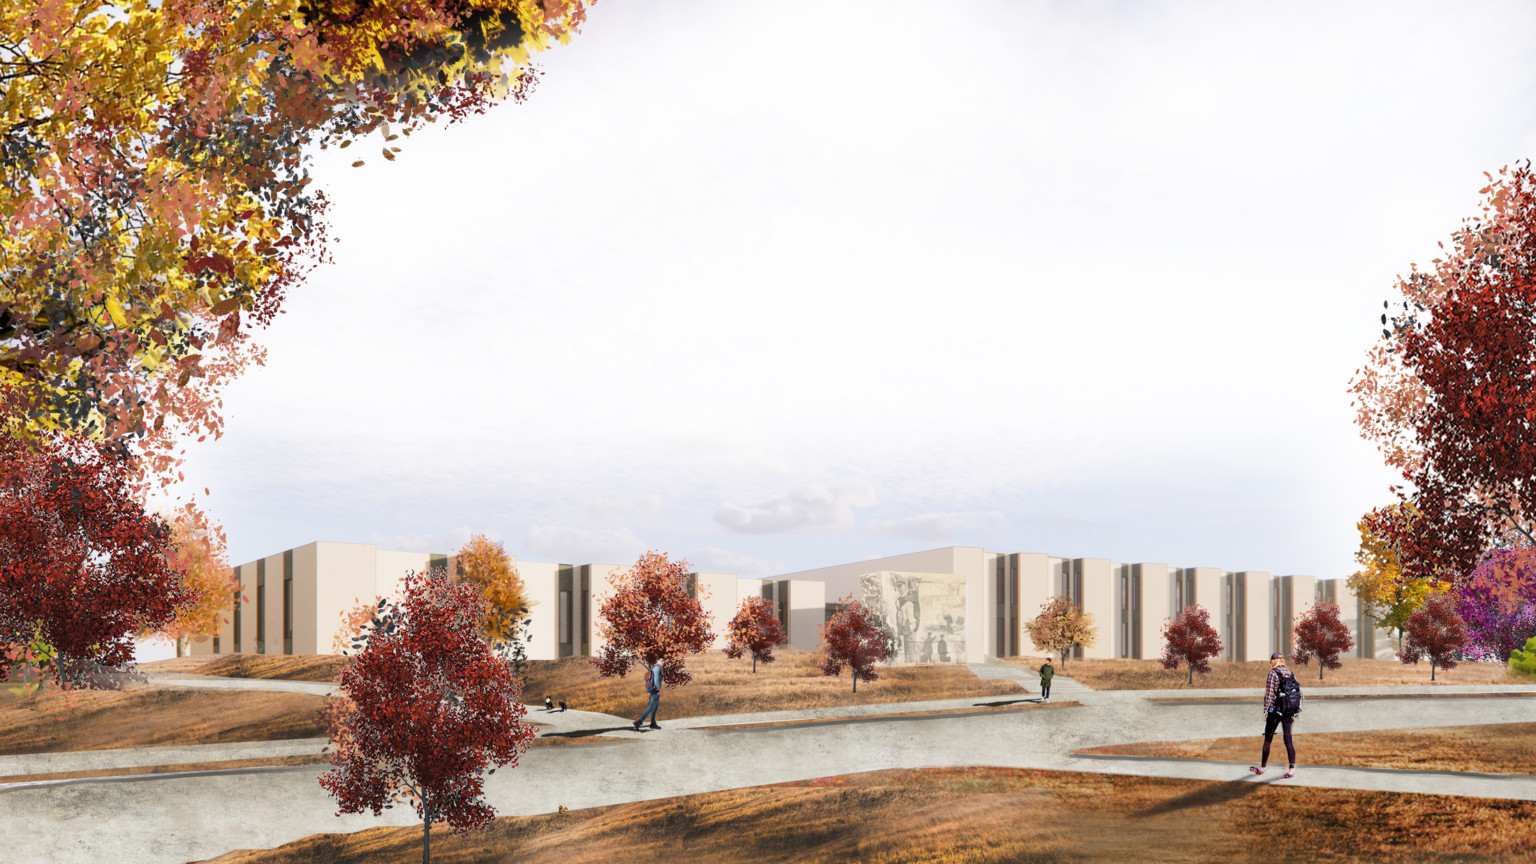 Boys Town school design concept, a white low rise complex surrounded by fall trees and intersecting sidewalks